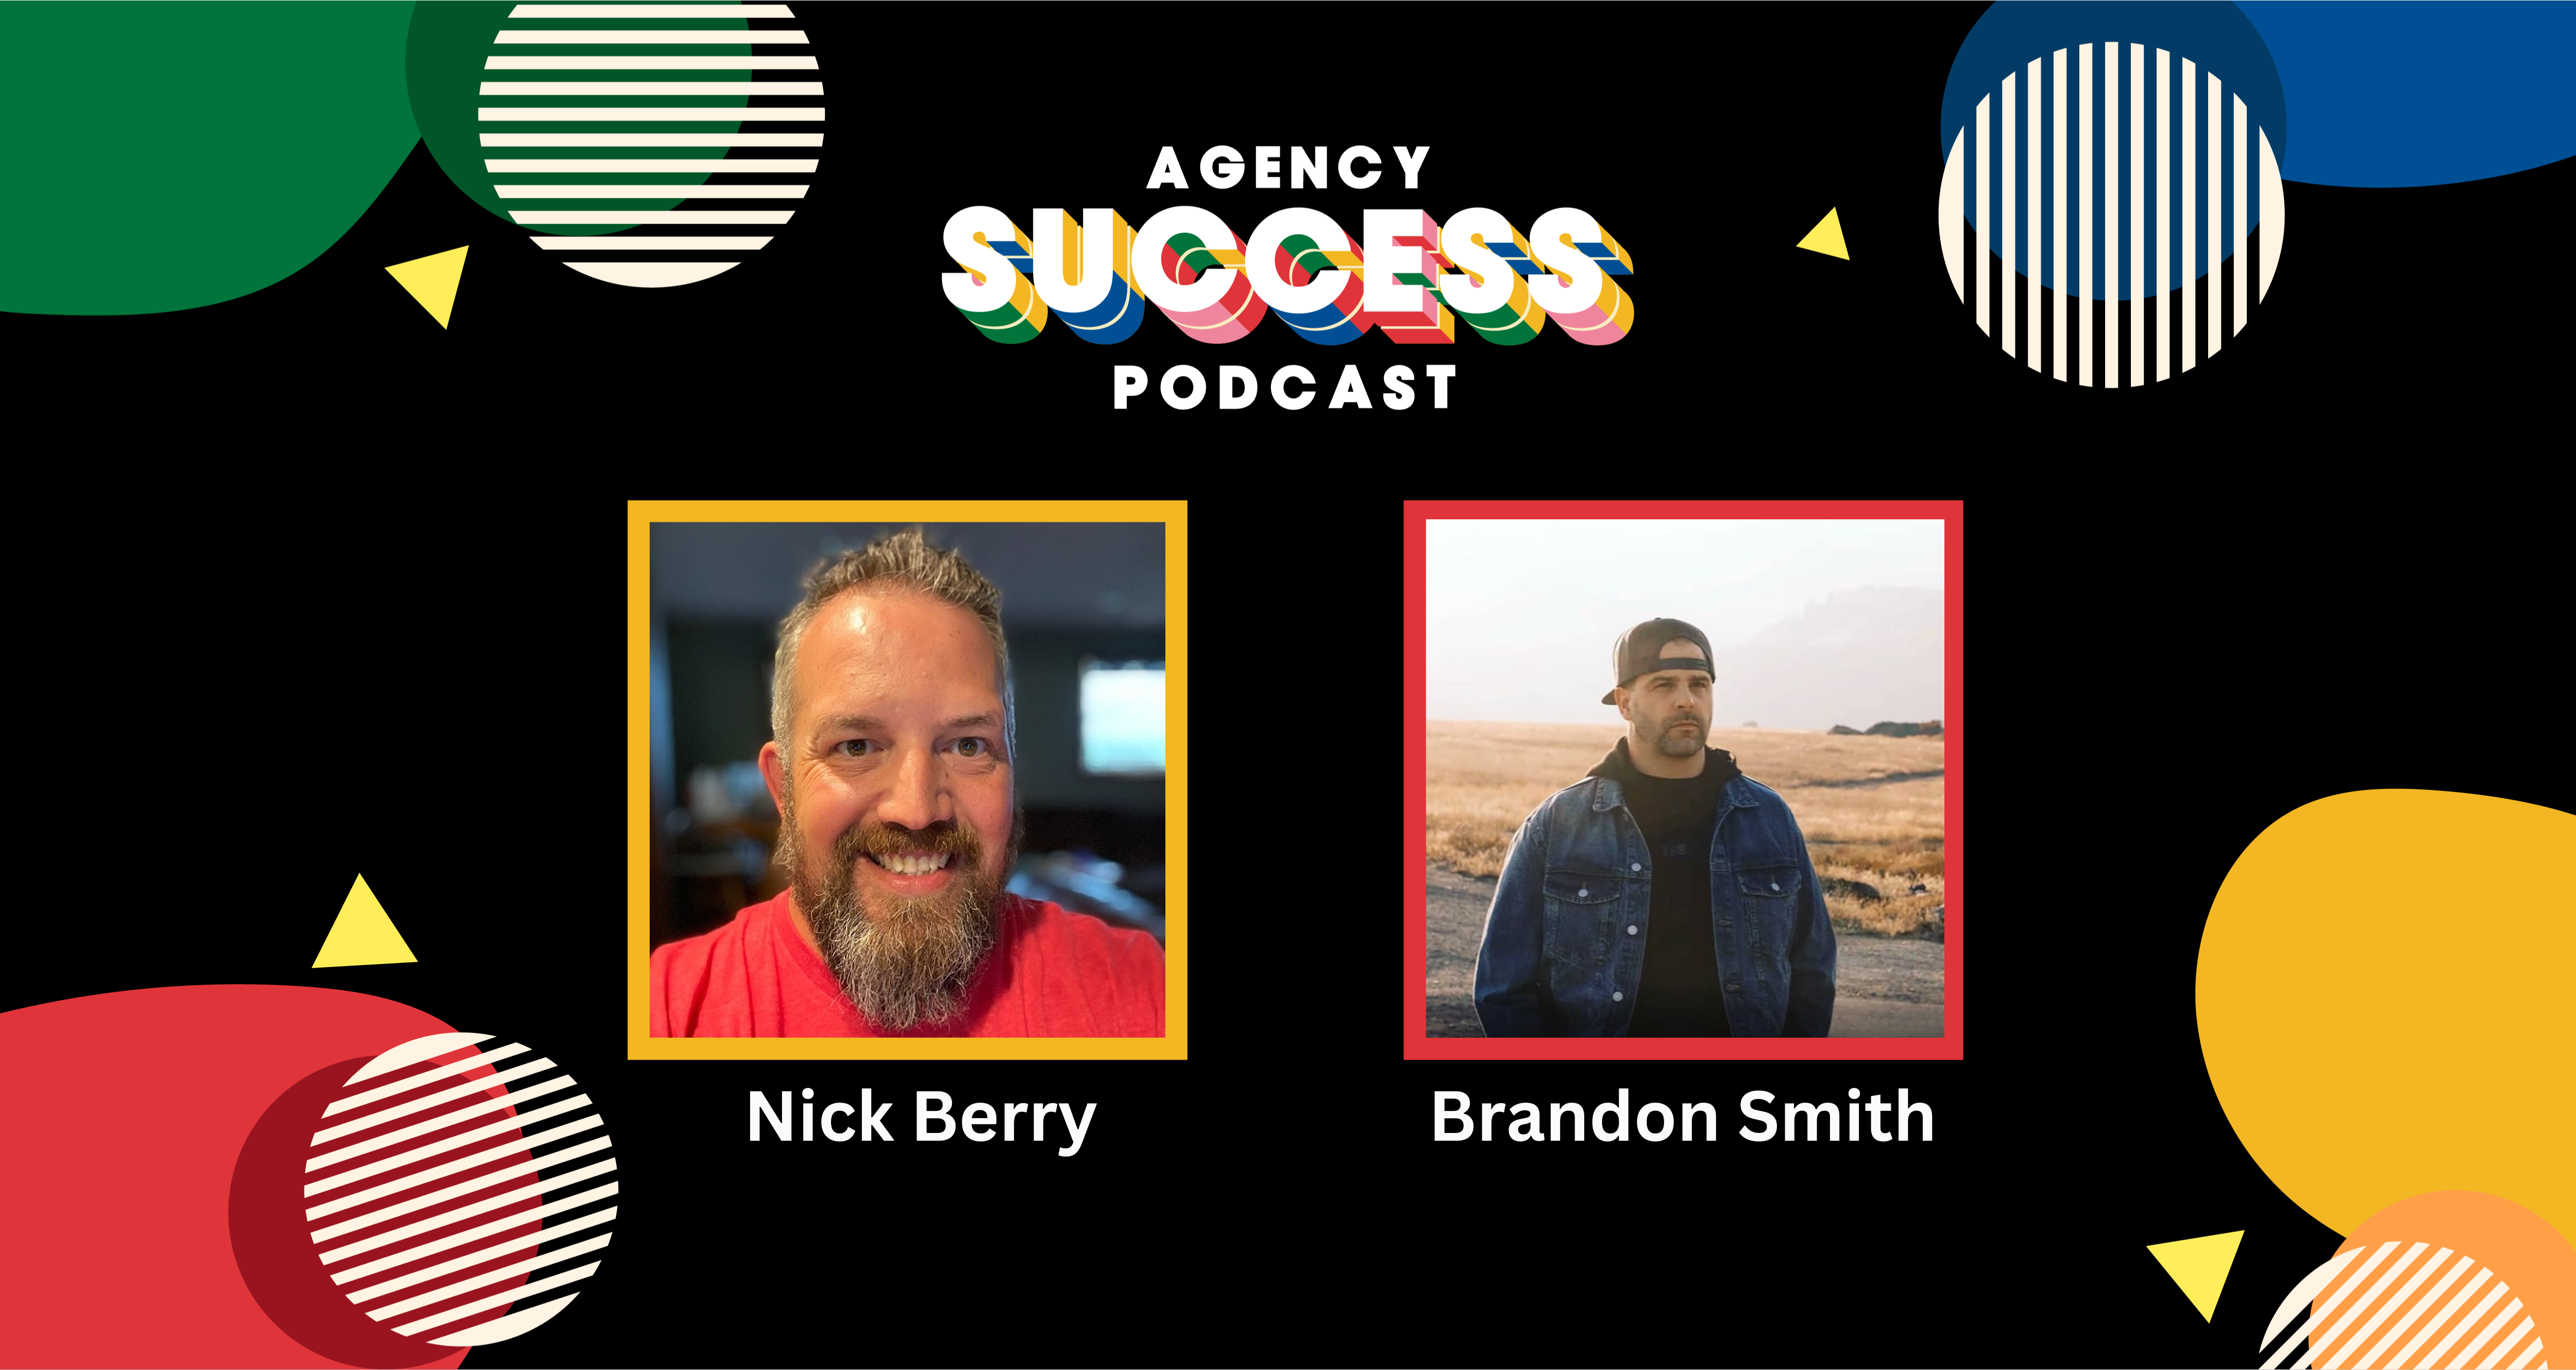 Agency Success Podcast Episode 5: From Zero to Success: Brandon Smith's Journey in the Insurance Industry and Predictions for the Future